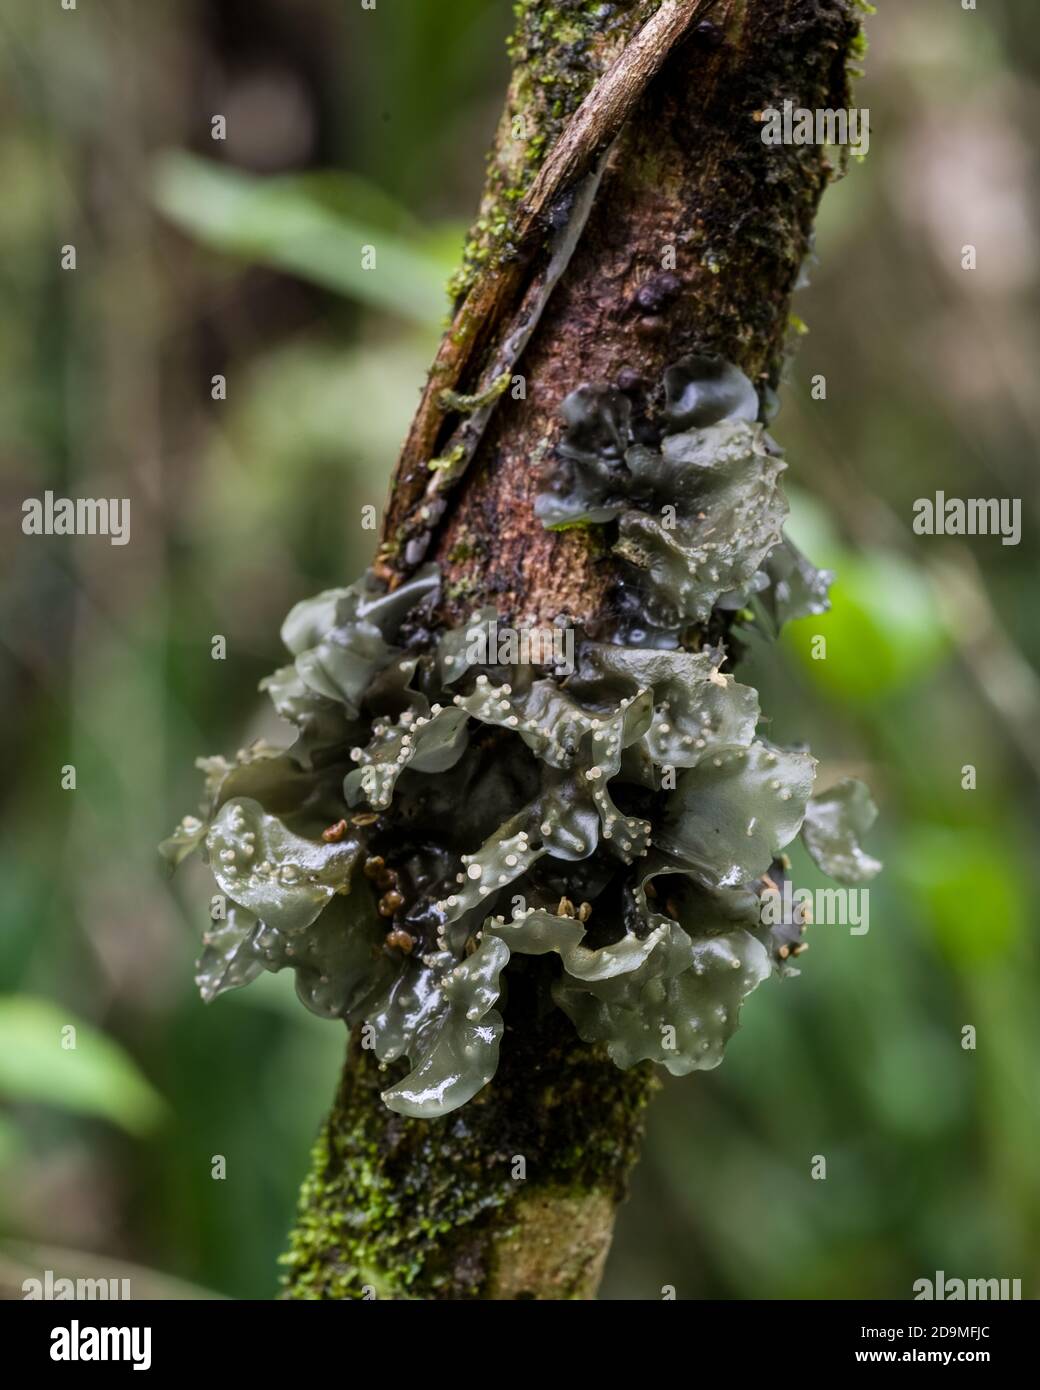 Fungi on a tree trunk in the rain forests of Panama.  Fungi are one of the principal means of breaking down decaying matter and recycling the nutrient Stock Photo